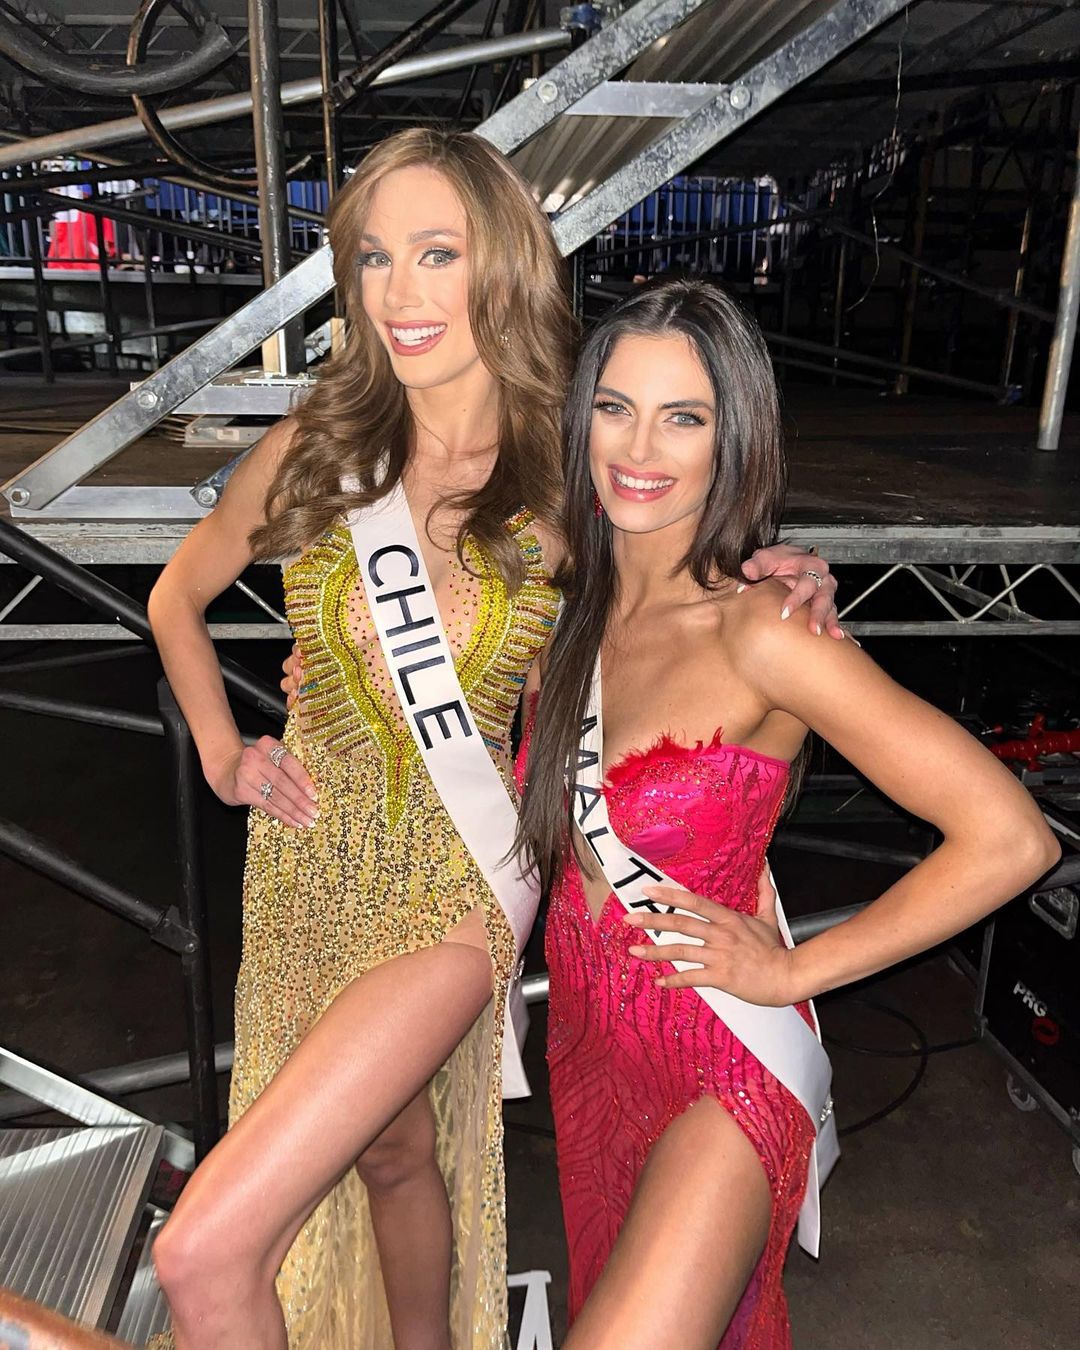 Miss Malta Maxine Formosa Gruppetta at the Miss Universe with Miss Chile